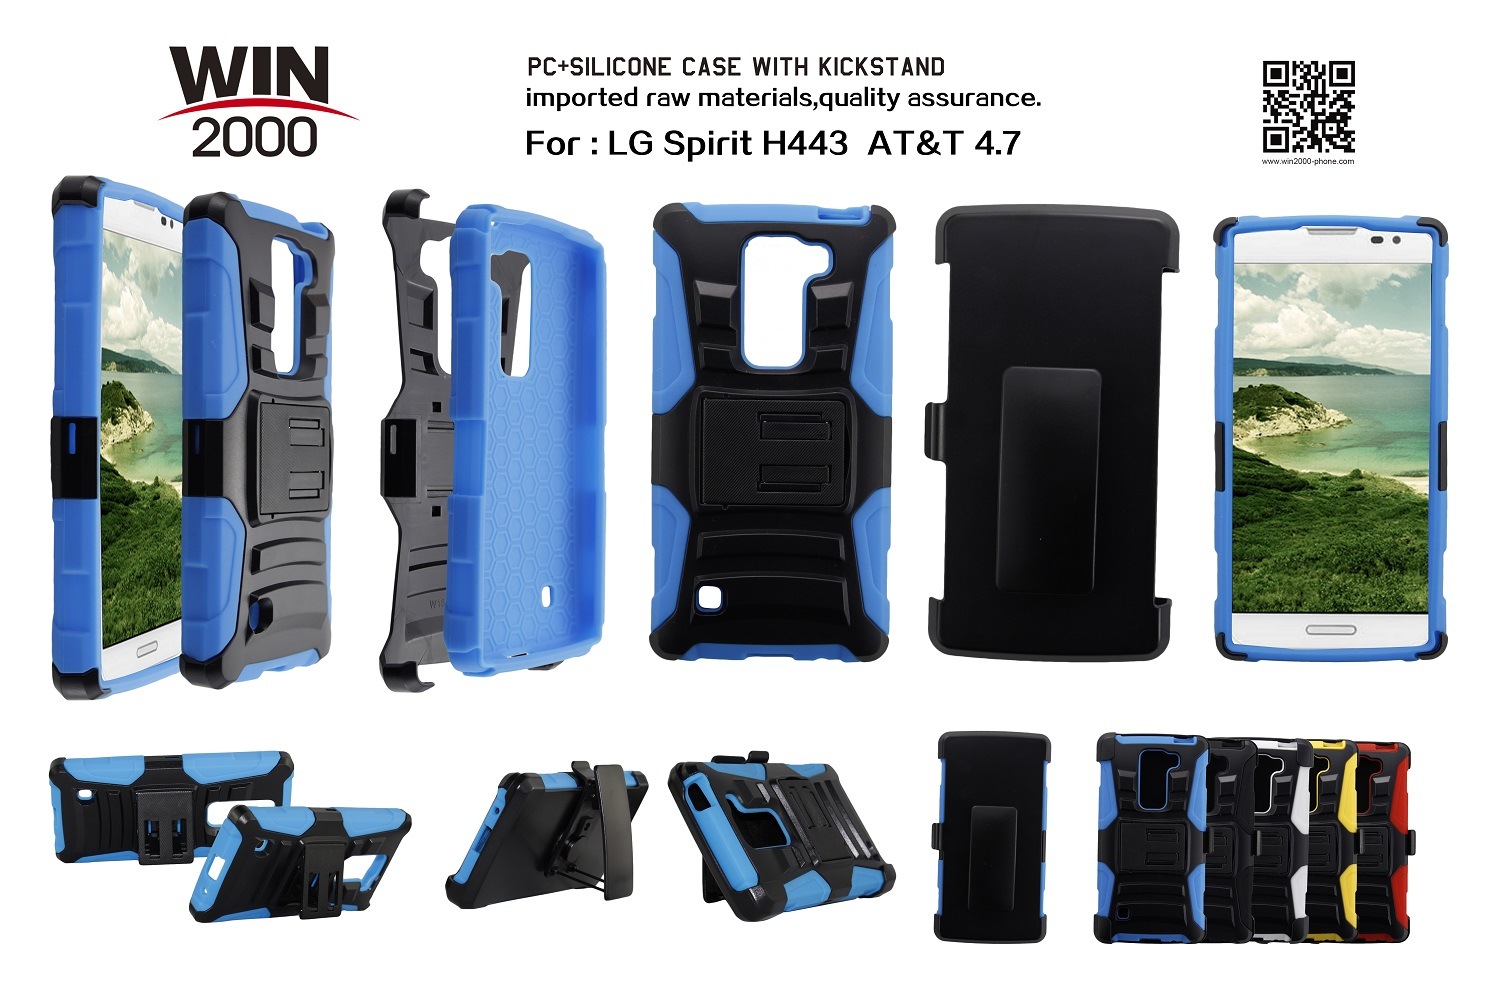 Mobile Phone Accessories for LG Spirit H443 AT&T 4.7